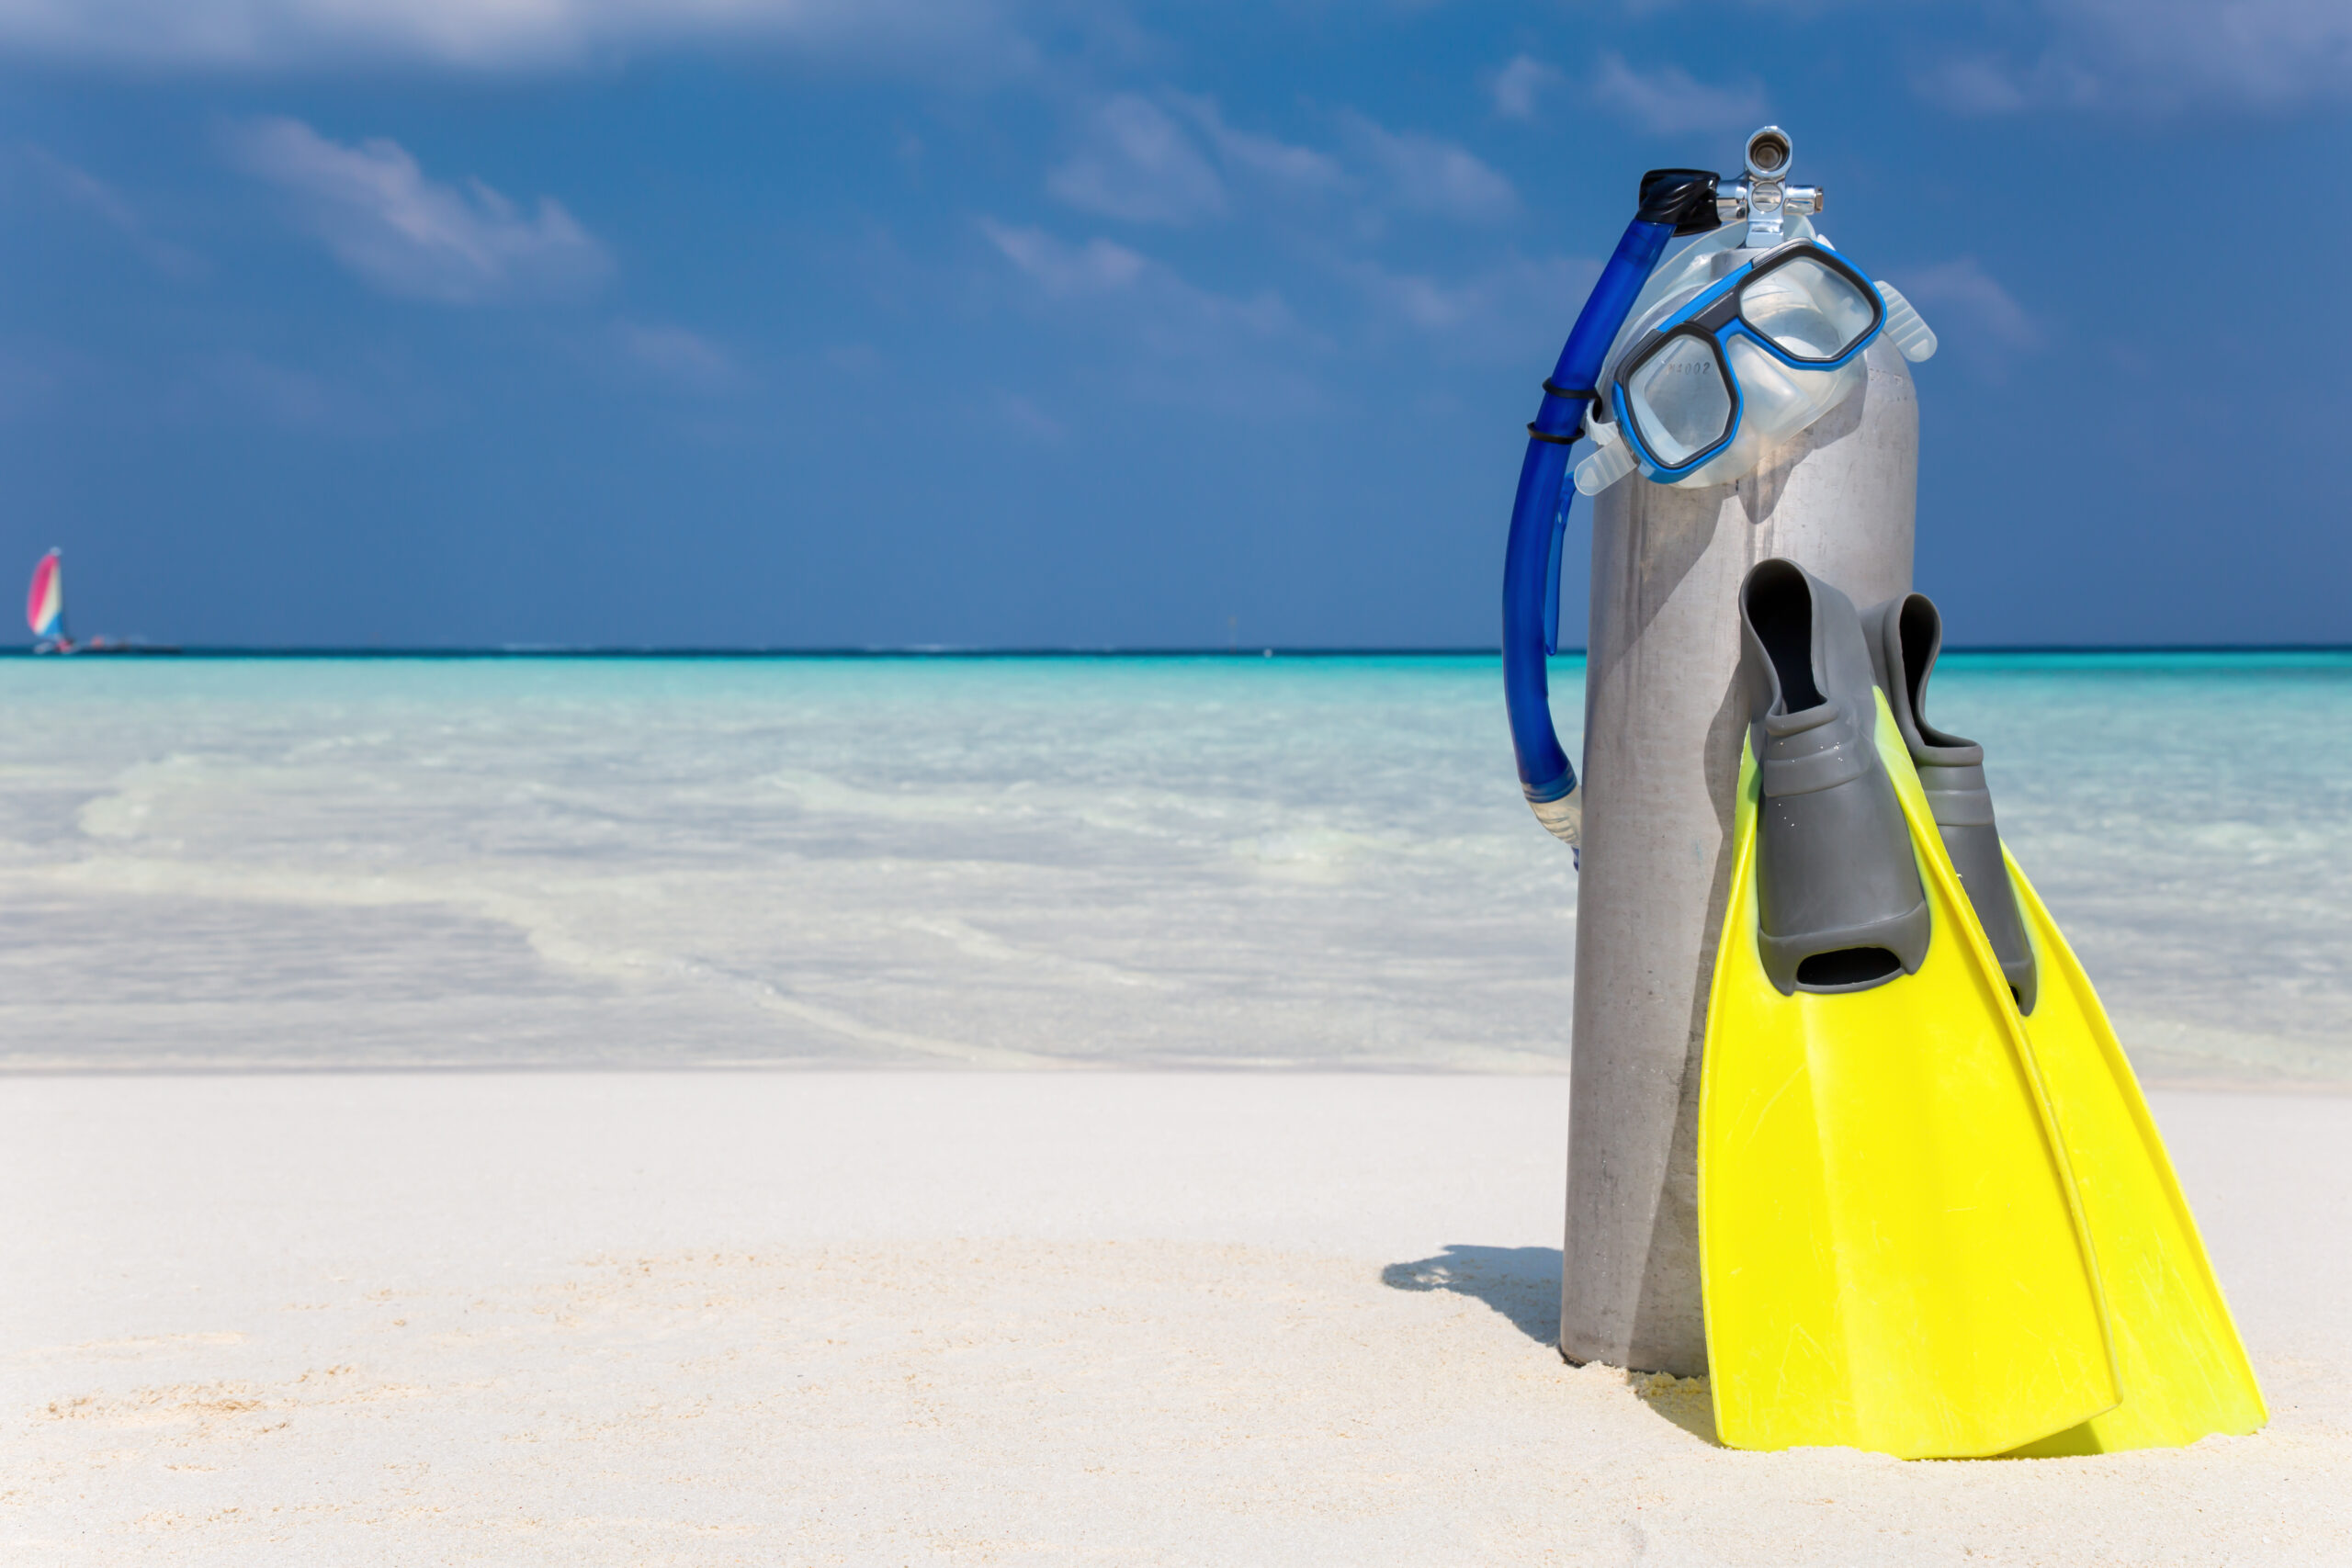 Scuba tank and flippers on beach